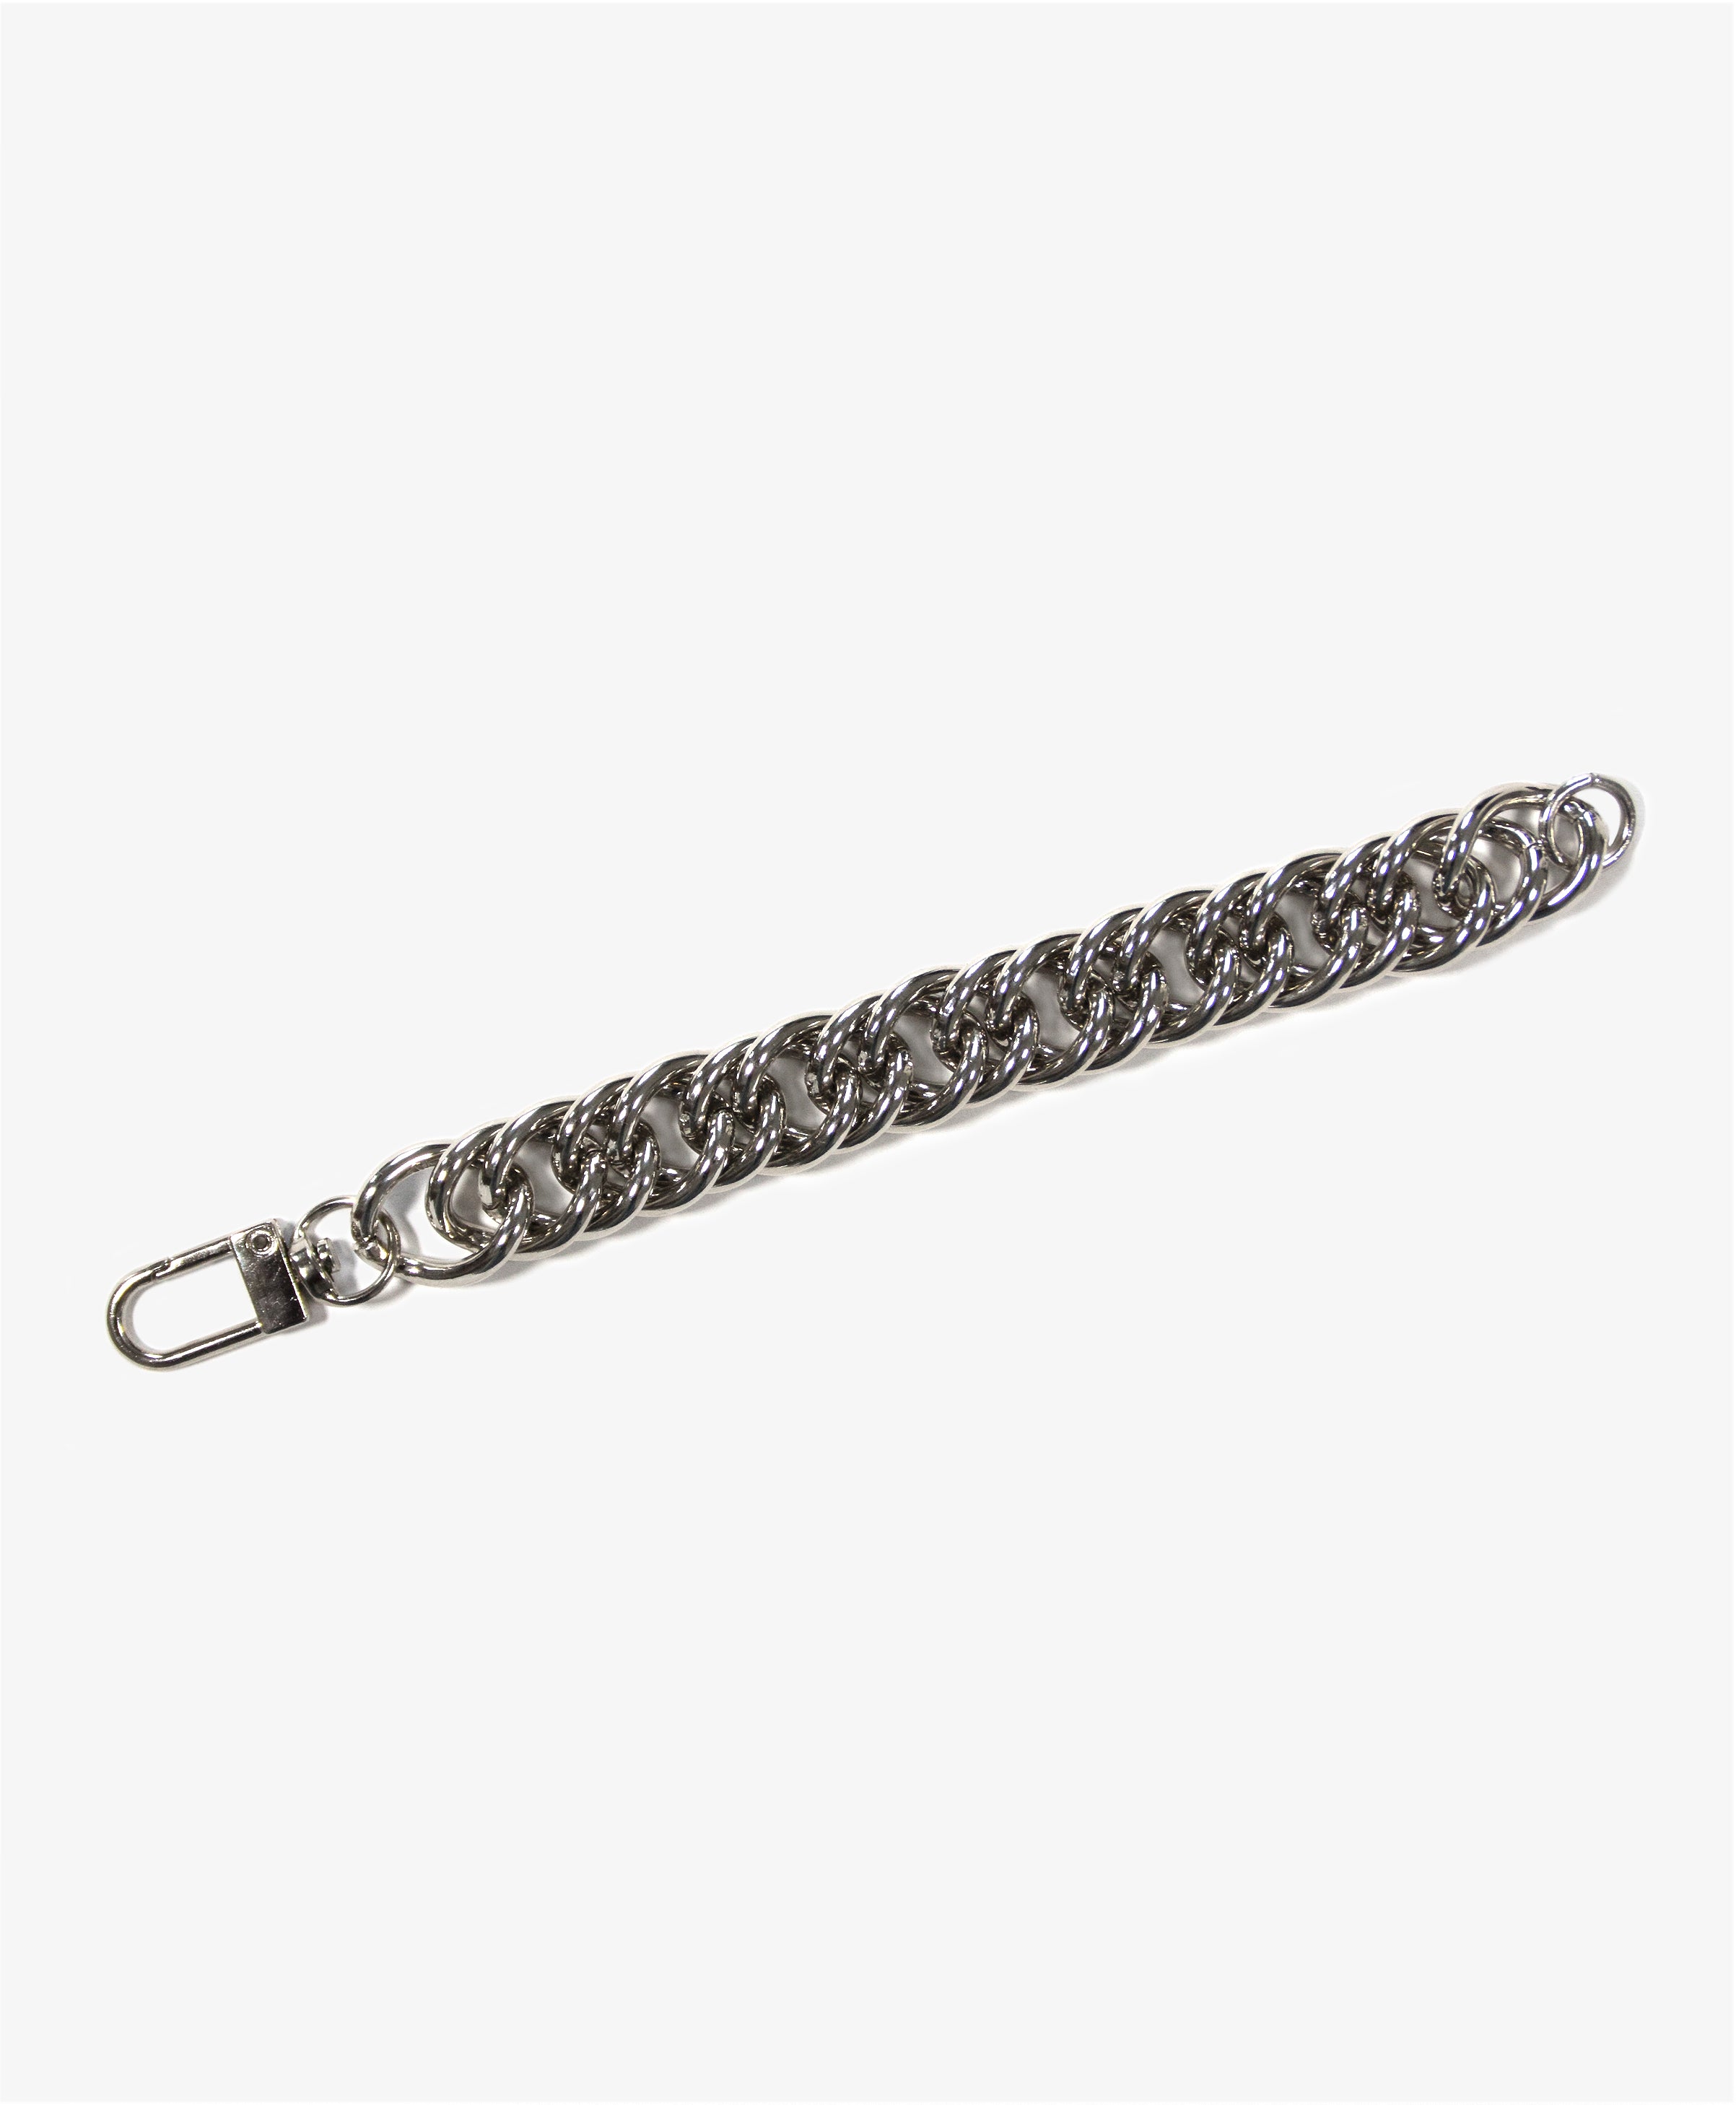 llayers-mens-women-jewelry-silver-stainlesssteel-chain-bracelet-unchained-002-New-York-1